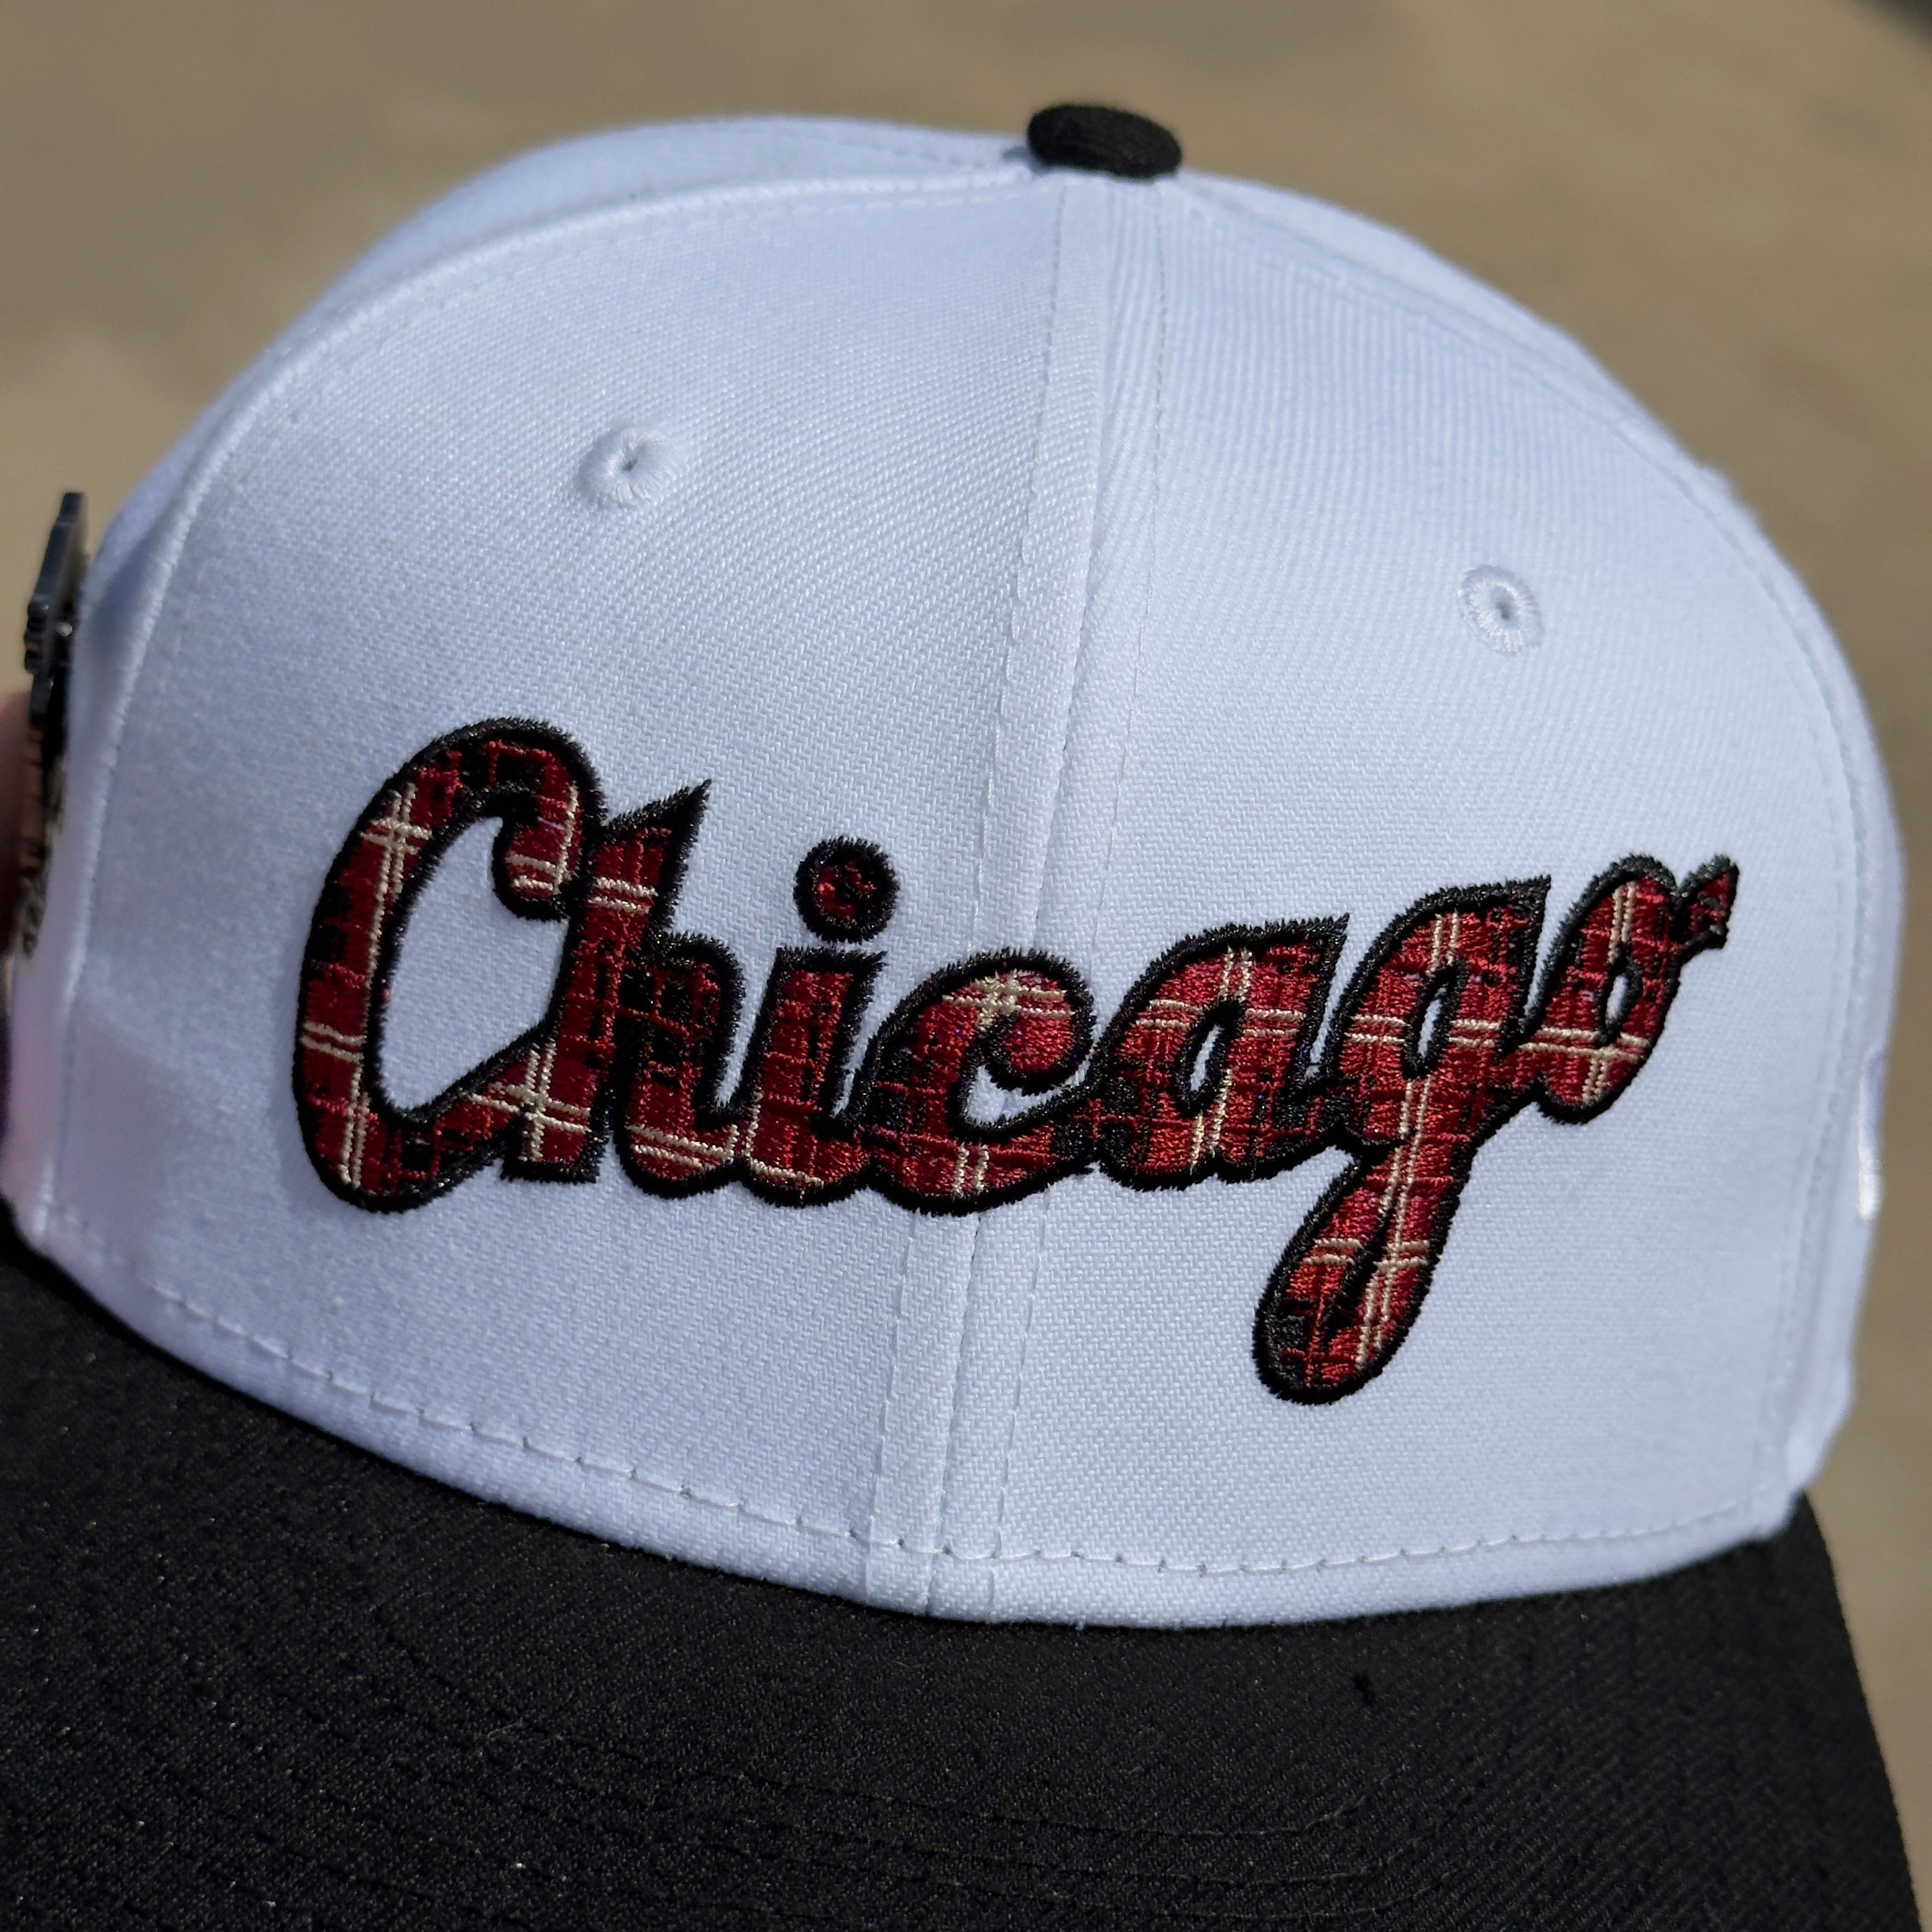 7 1/8 USED White Chicago White Sox Comiskey Park Hatclub 59fifty New Era Fitted Cap